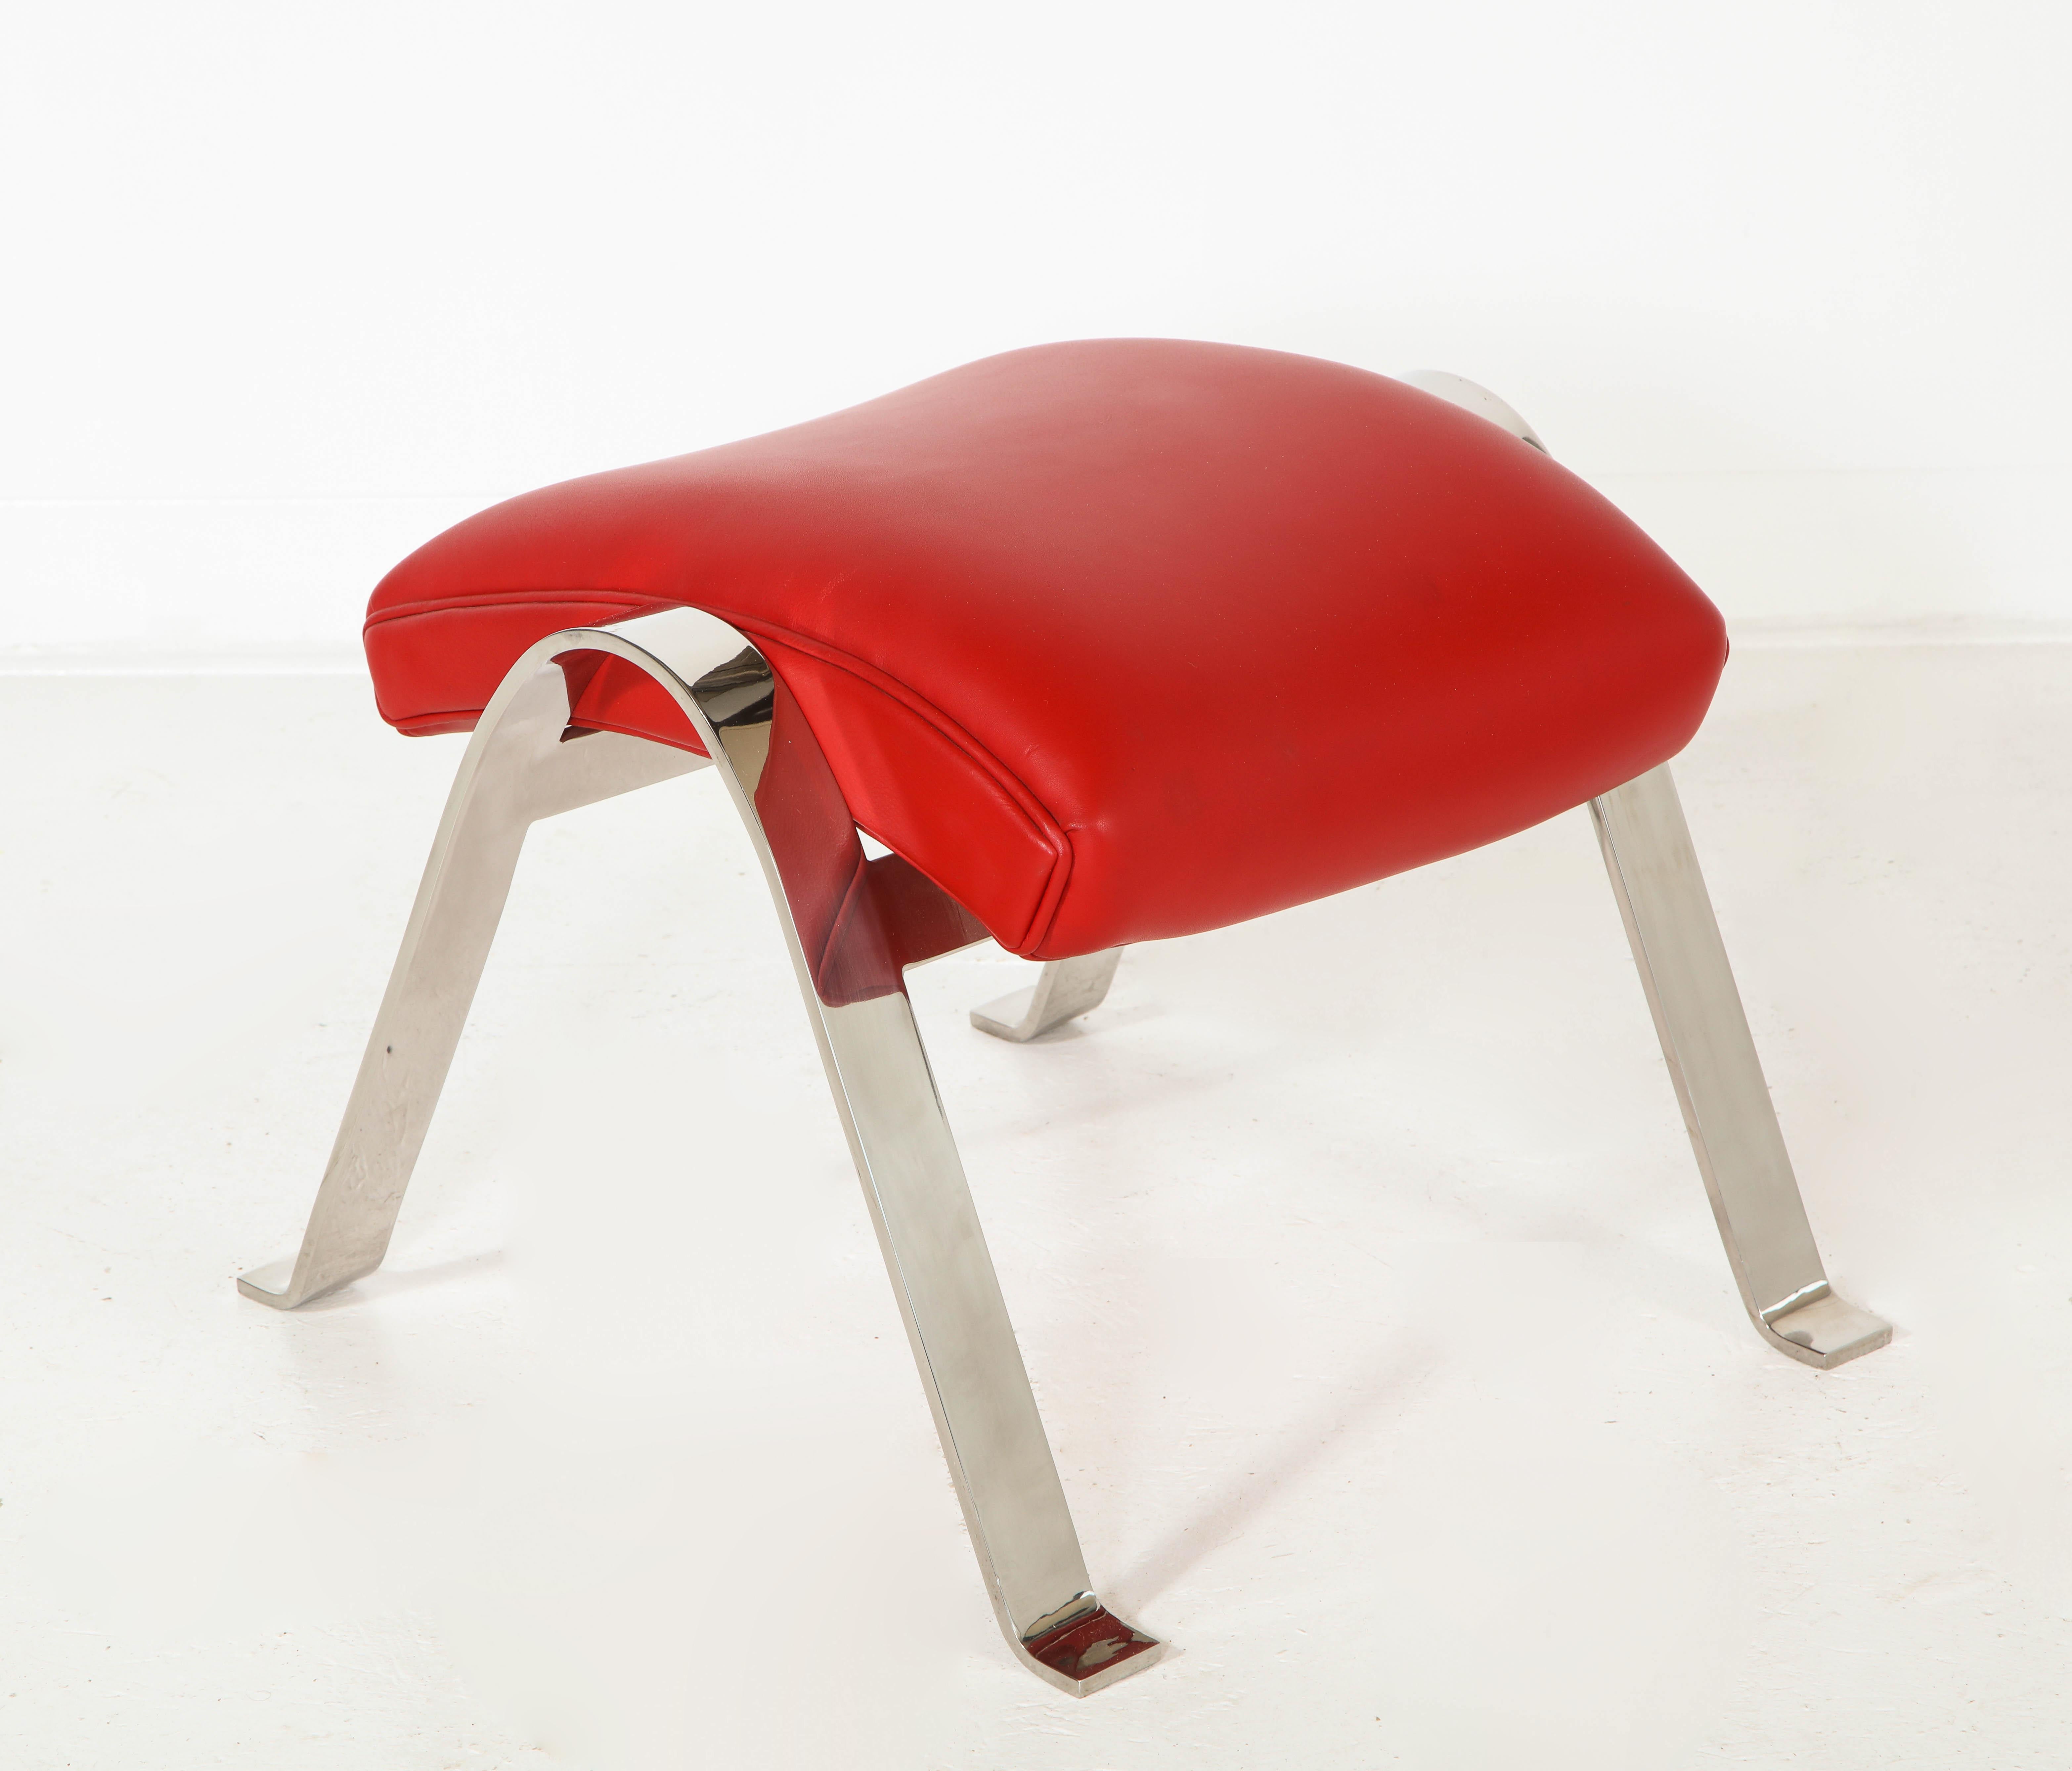 Foot Stool in Red Offered by Vladimir Kagan Design Group For Sale 2